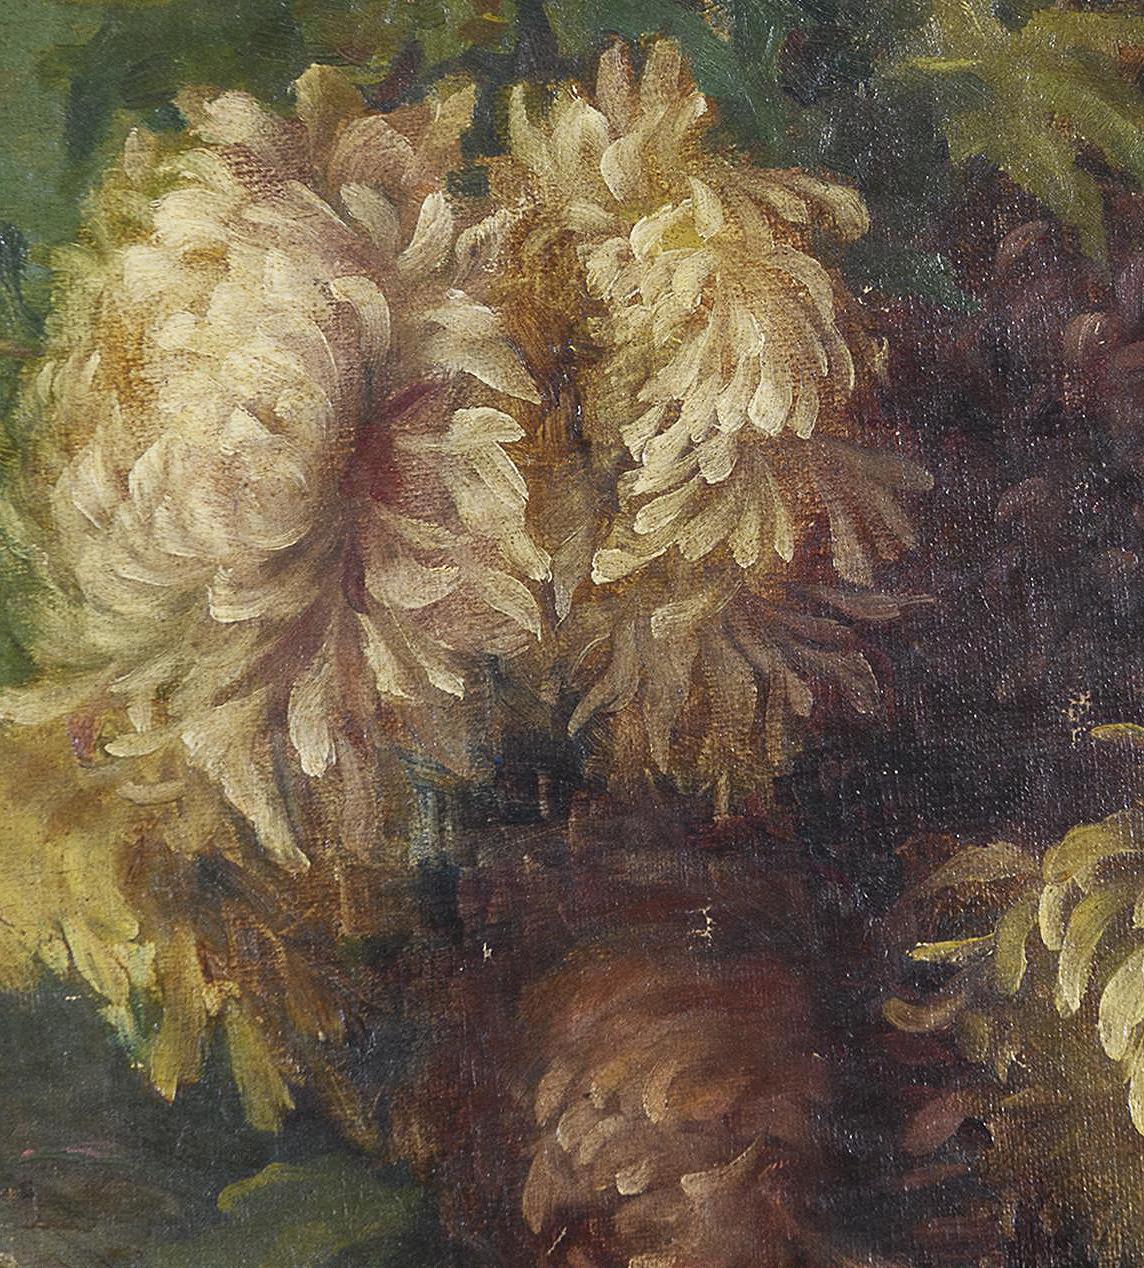 A.B. Stringi (?)
Early 19th cent.; Probably Sicily, Italy
Oil on canvas in giltwood frame

Approximate size: 19 inches (diameter)

The present painting features a bouquet of mixed aster maladies in subdued whites, pinks and yellows framed within a